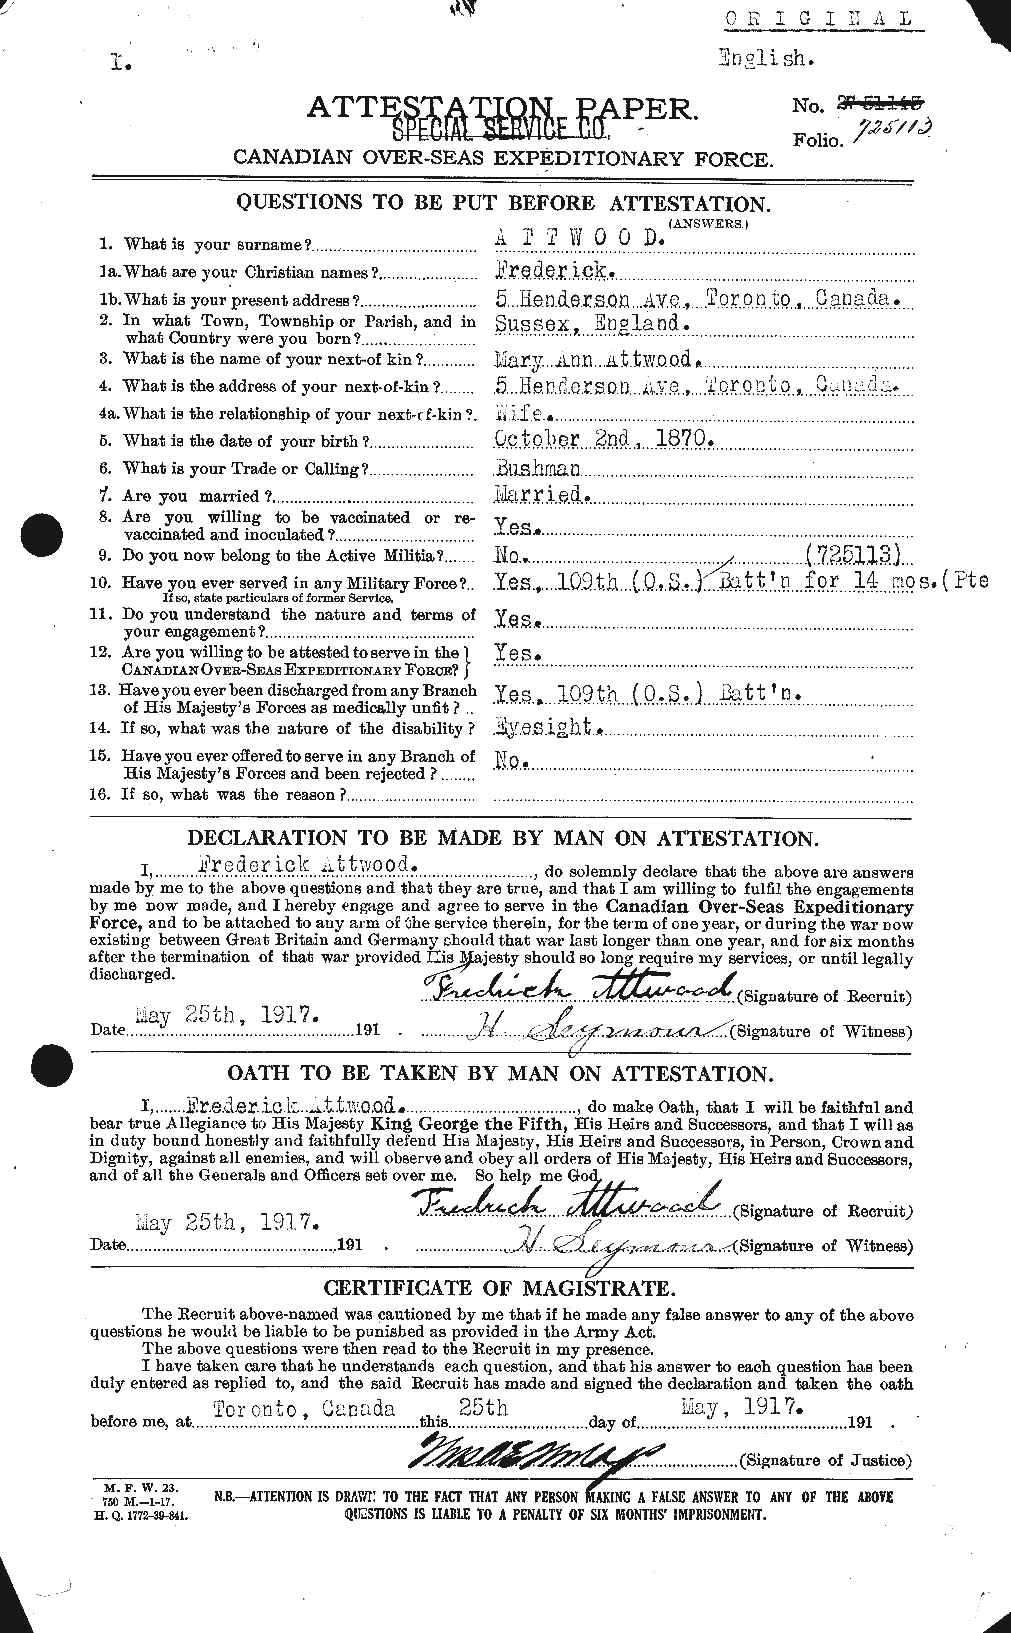 Personnel Records of the First World War - CEF 224019a